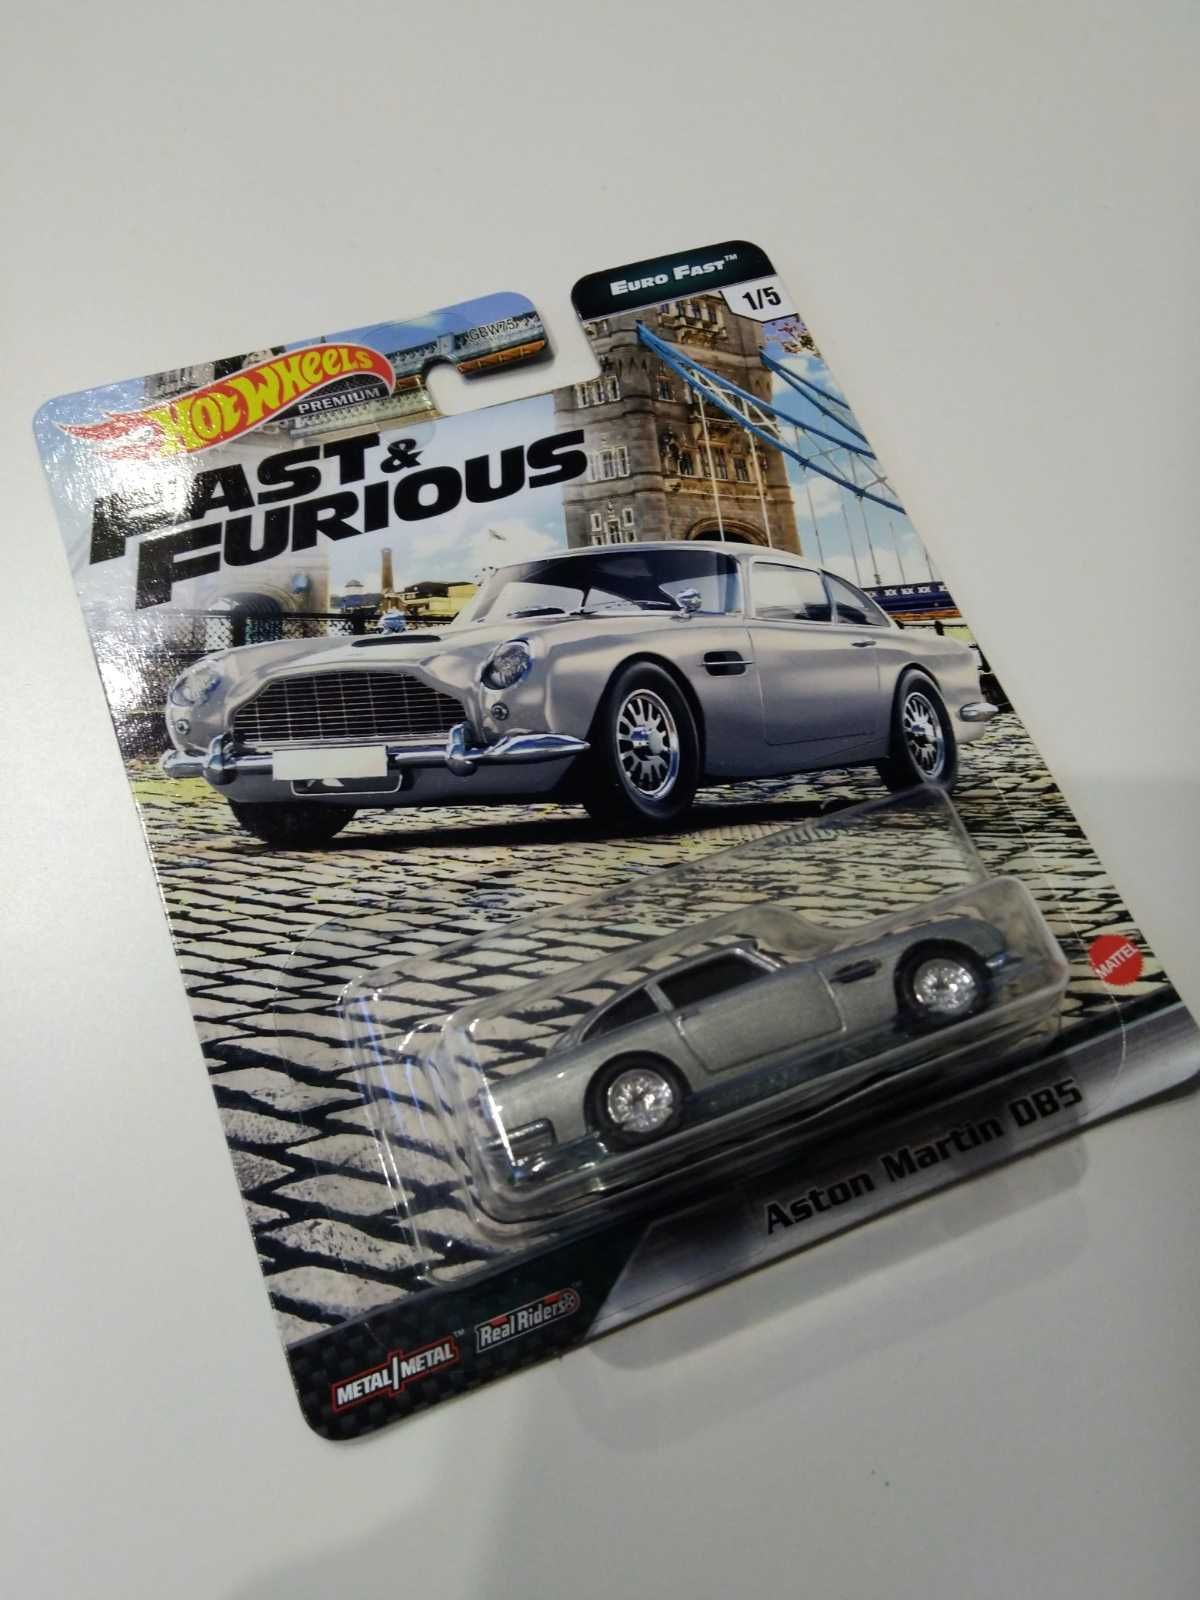 Hot Wheels Fast and Furious Aston Martin DB5 James Bond No Time To Die